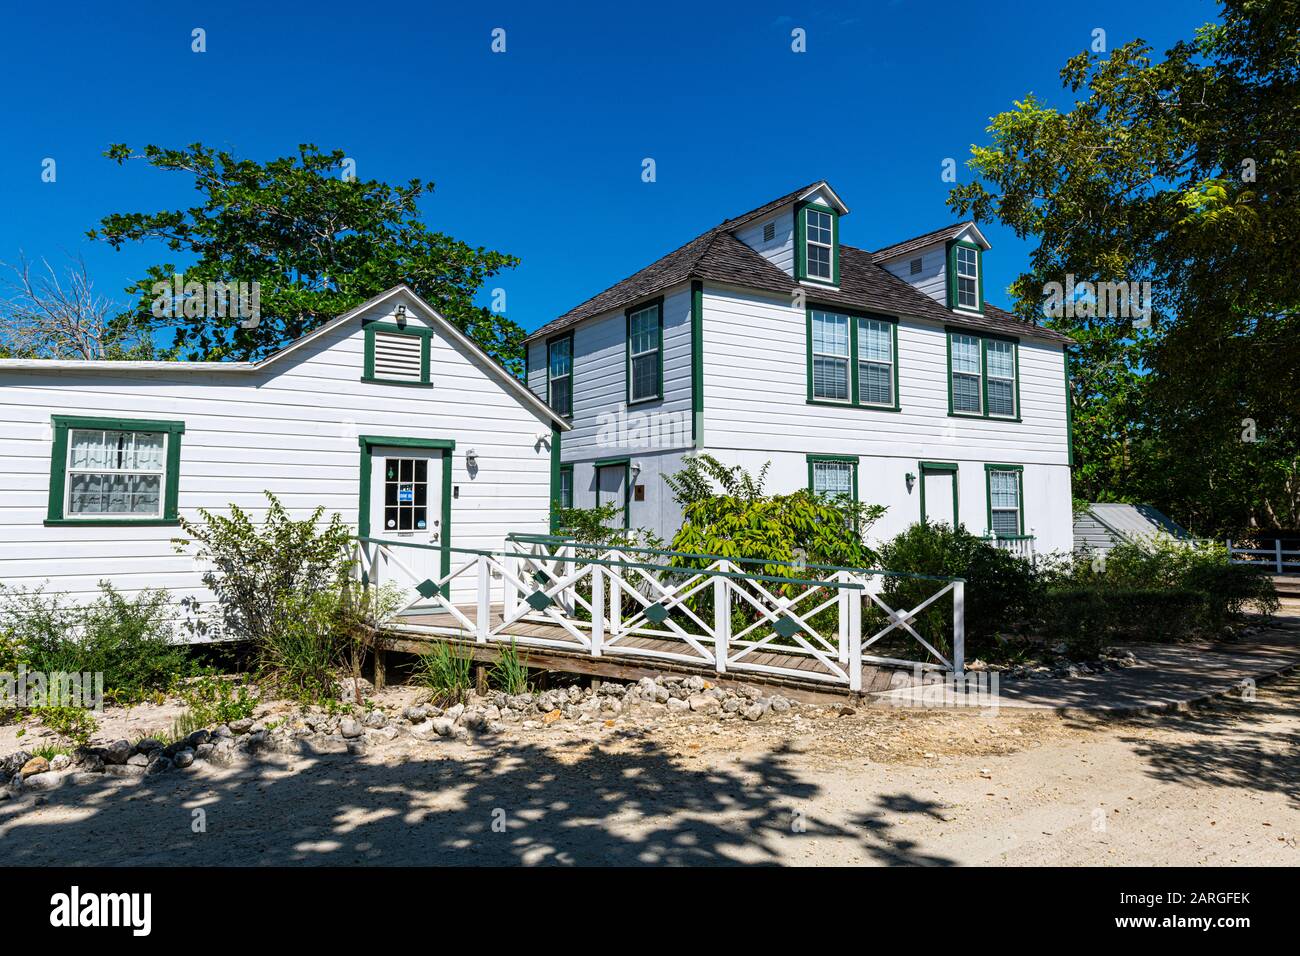 Bodden town Mission house, Grand Cayman, Cayman Islands, Caribbean, Central America Stock Photo